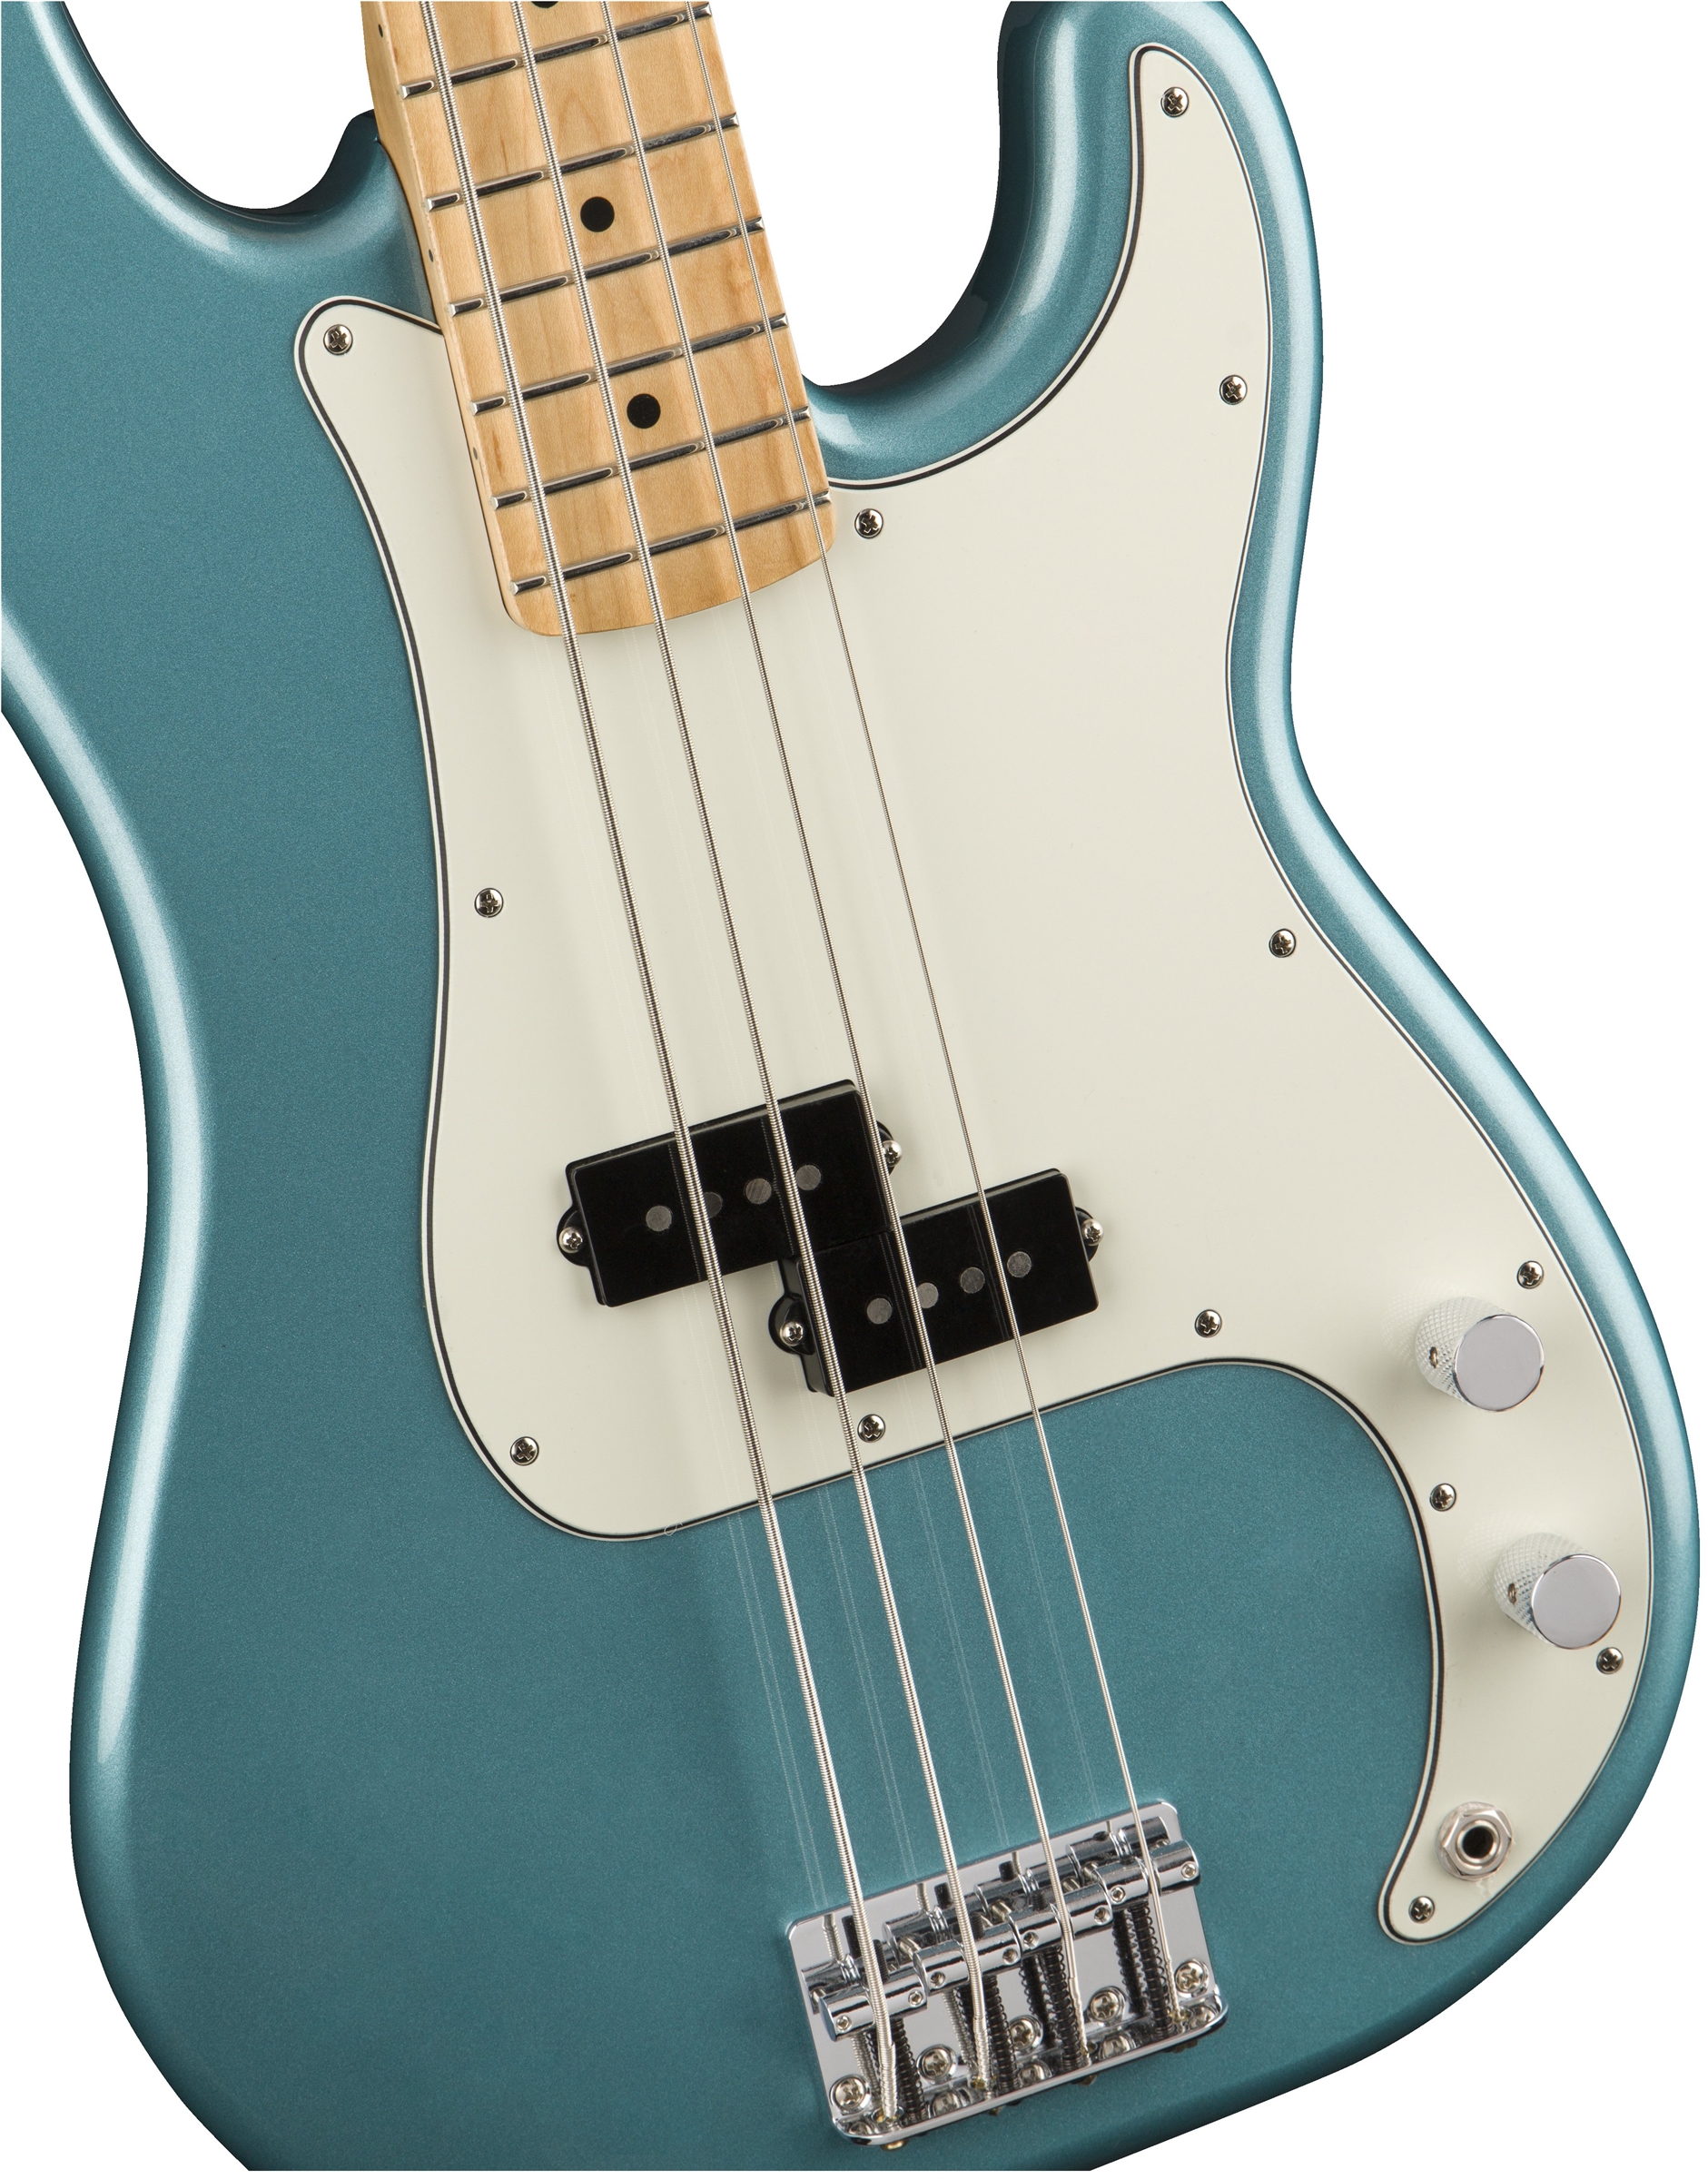 Fender Precision Bass Player Mex Mn - Tidepool - Solid body electric bass - Variation 2